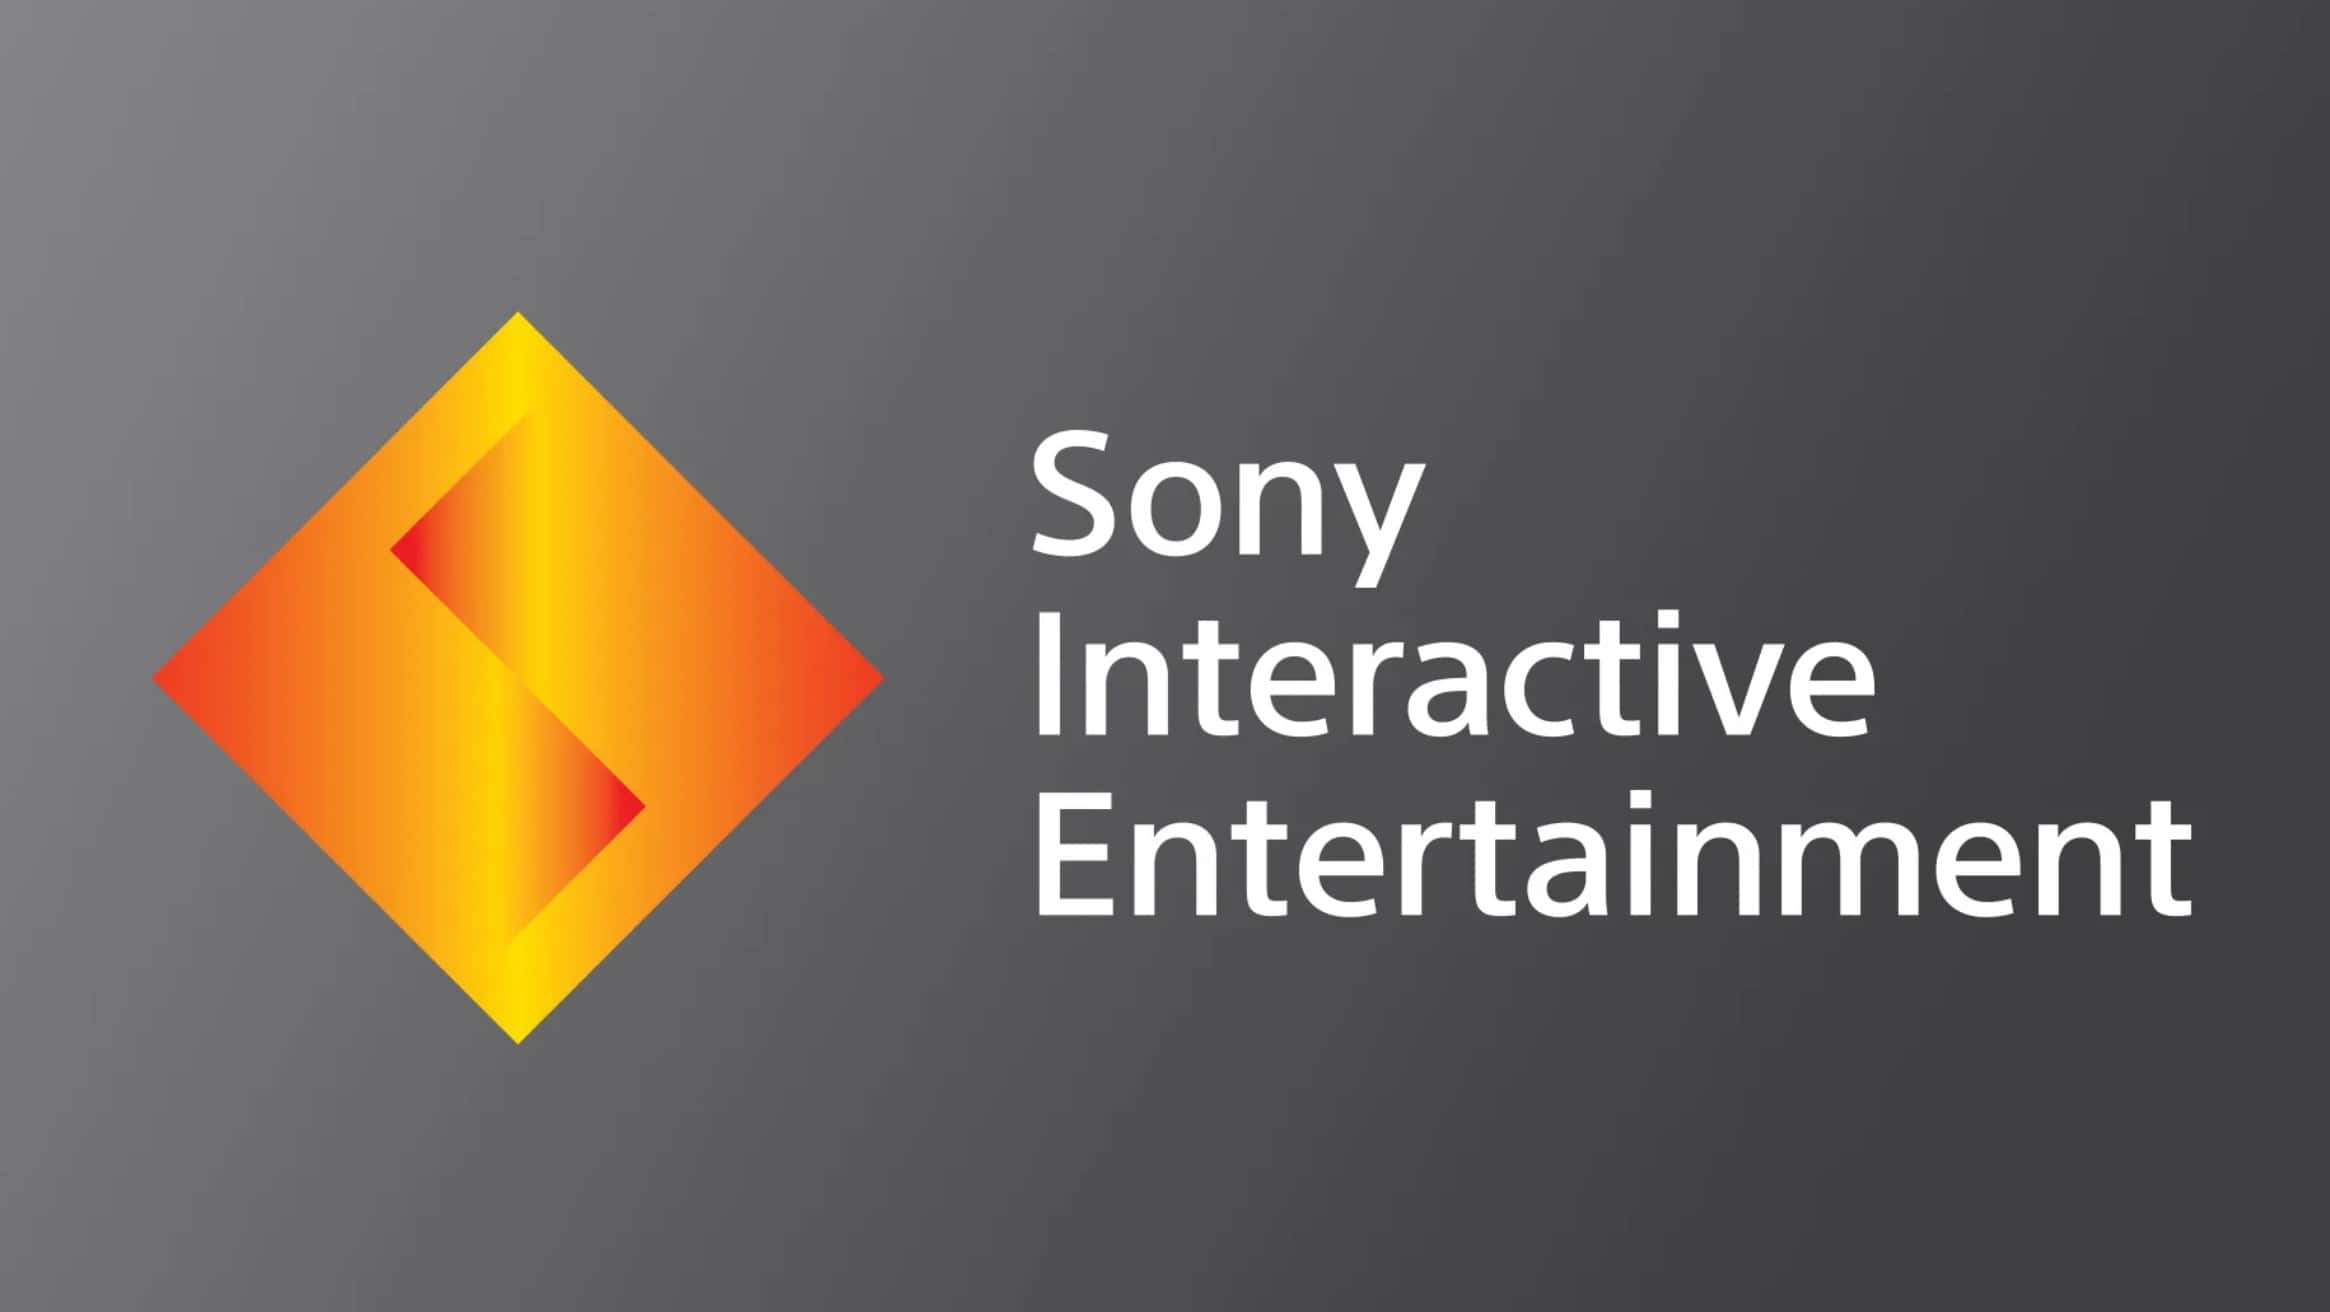 Sony PlayStation announces global job cuts of 900 as industry landscape shifts